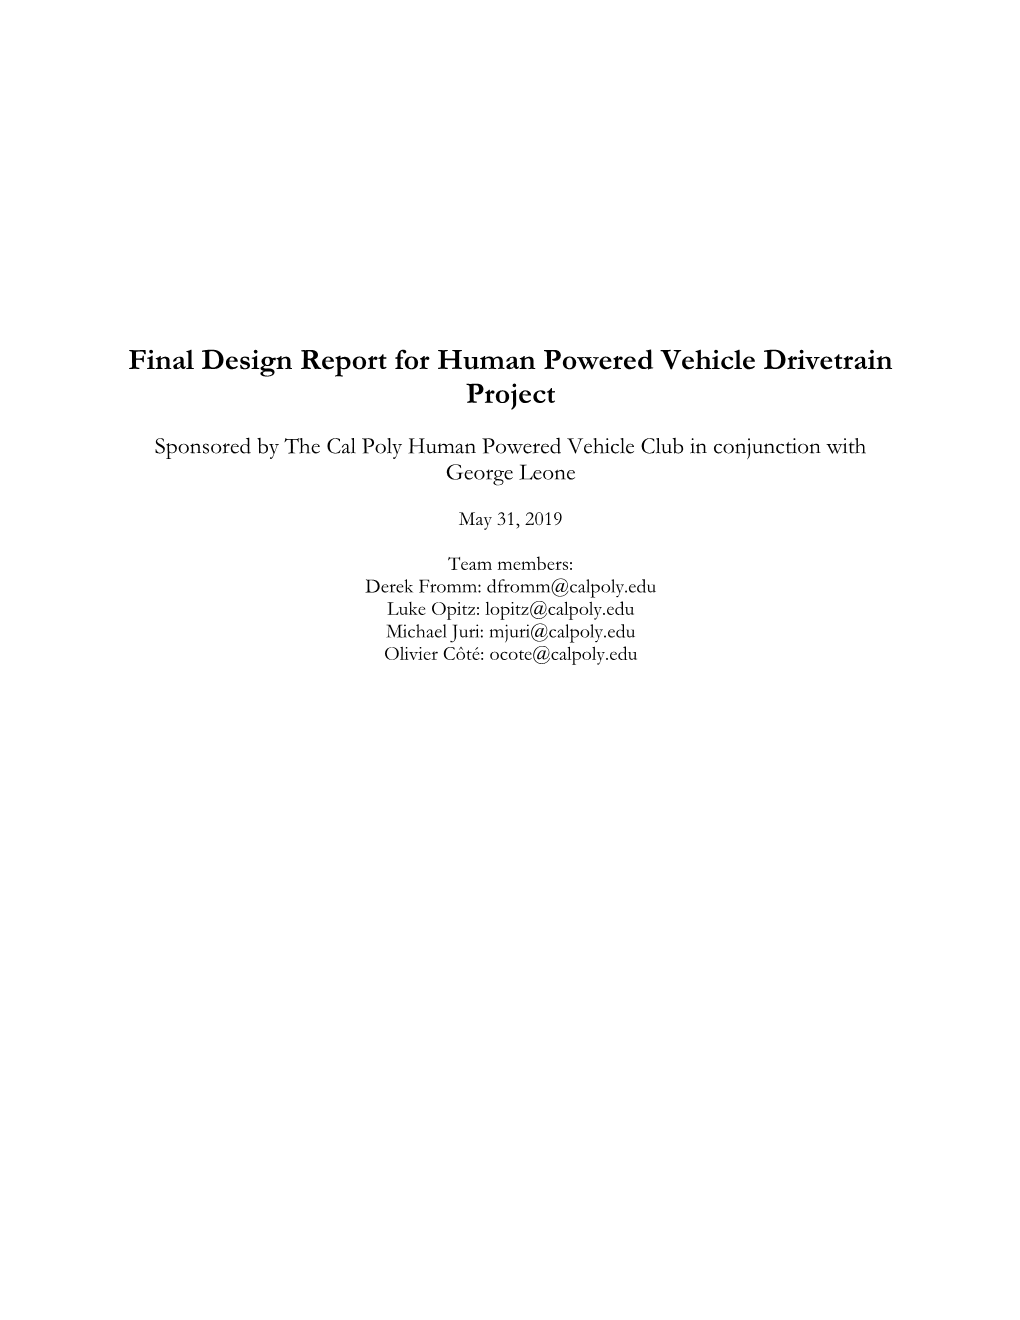 Final Design Report for Human Powered Vehicle Drivetrain Project